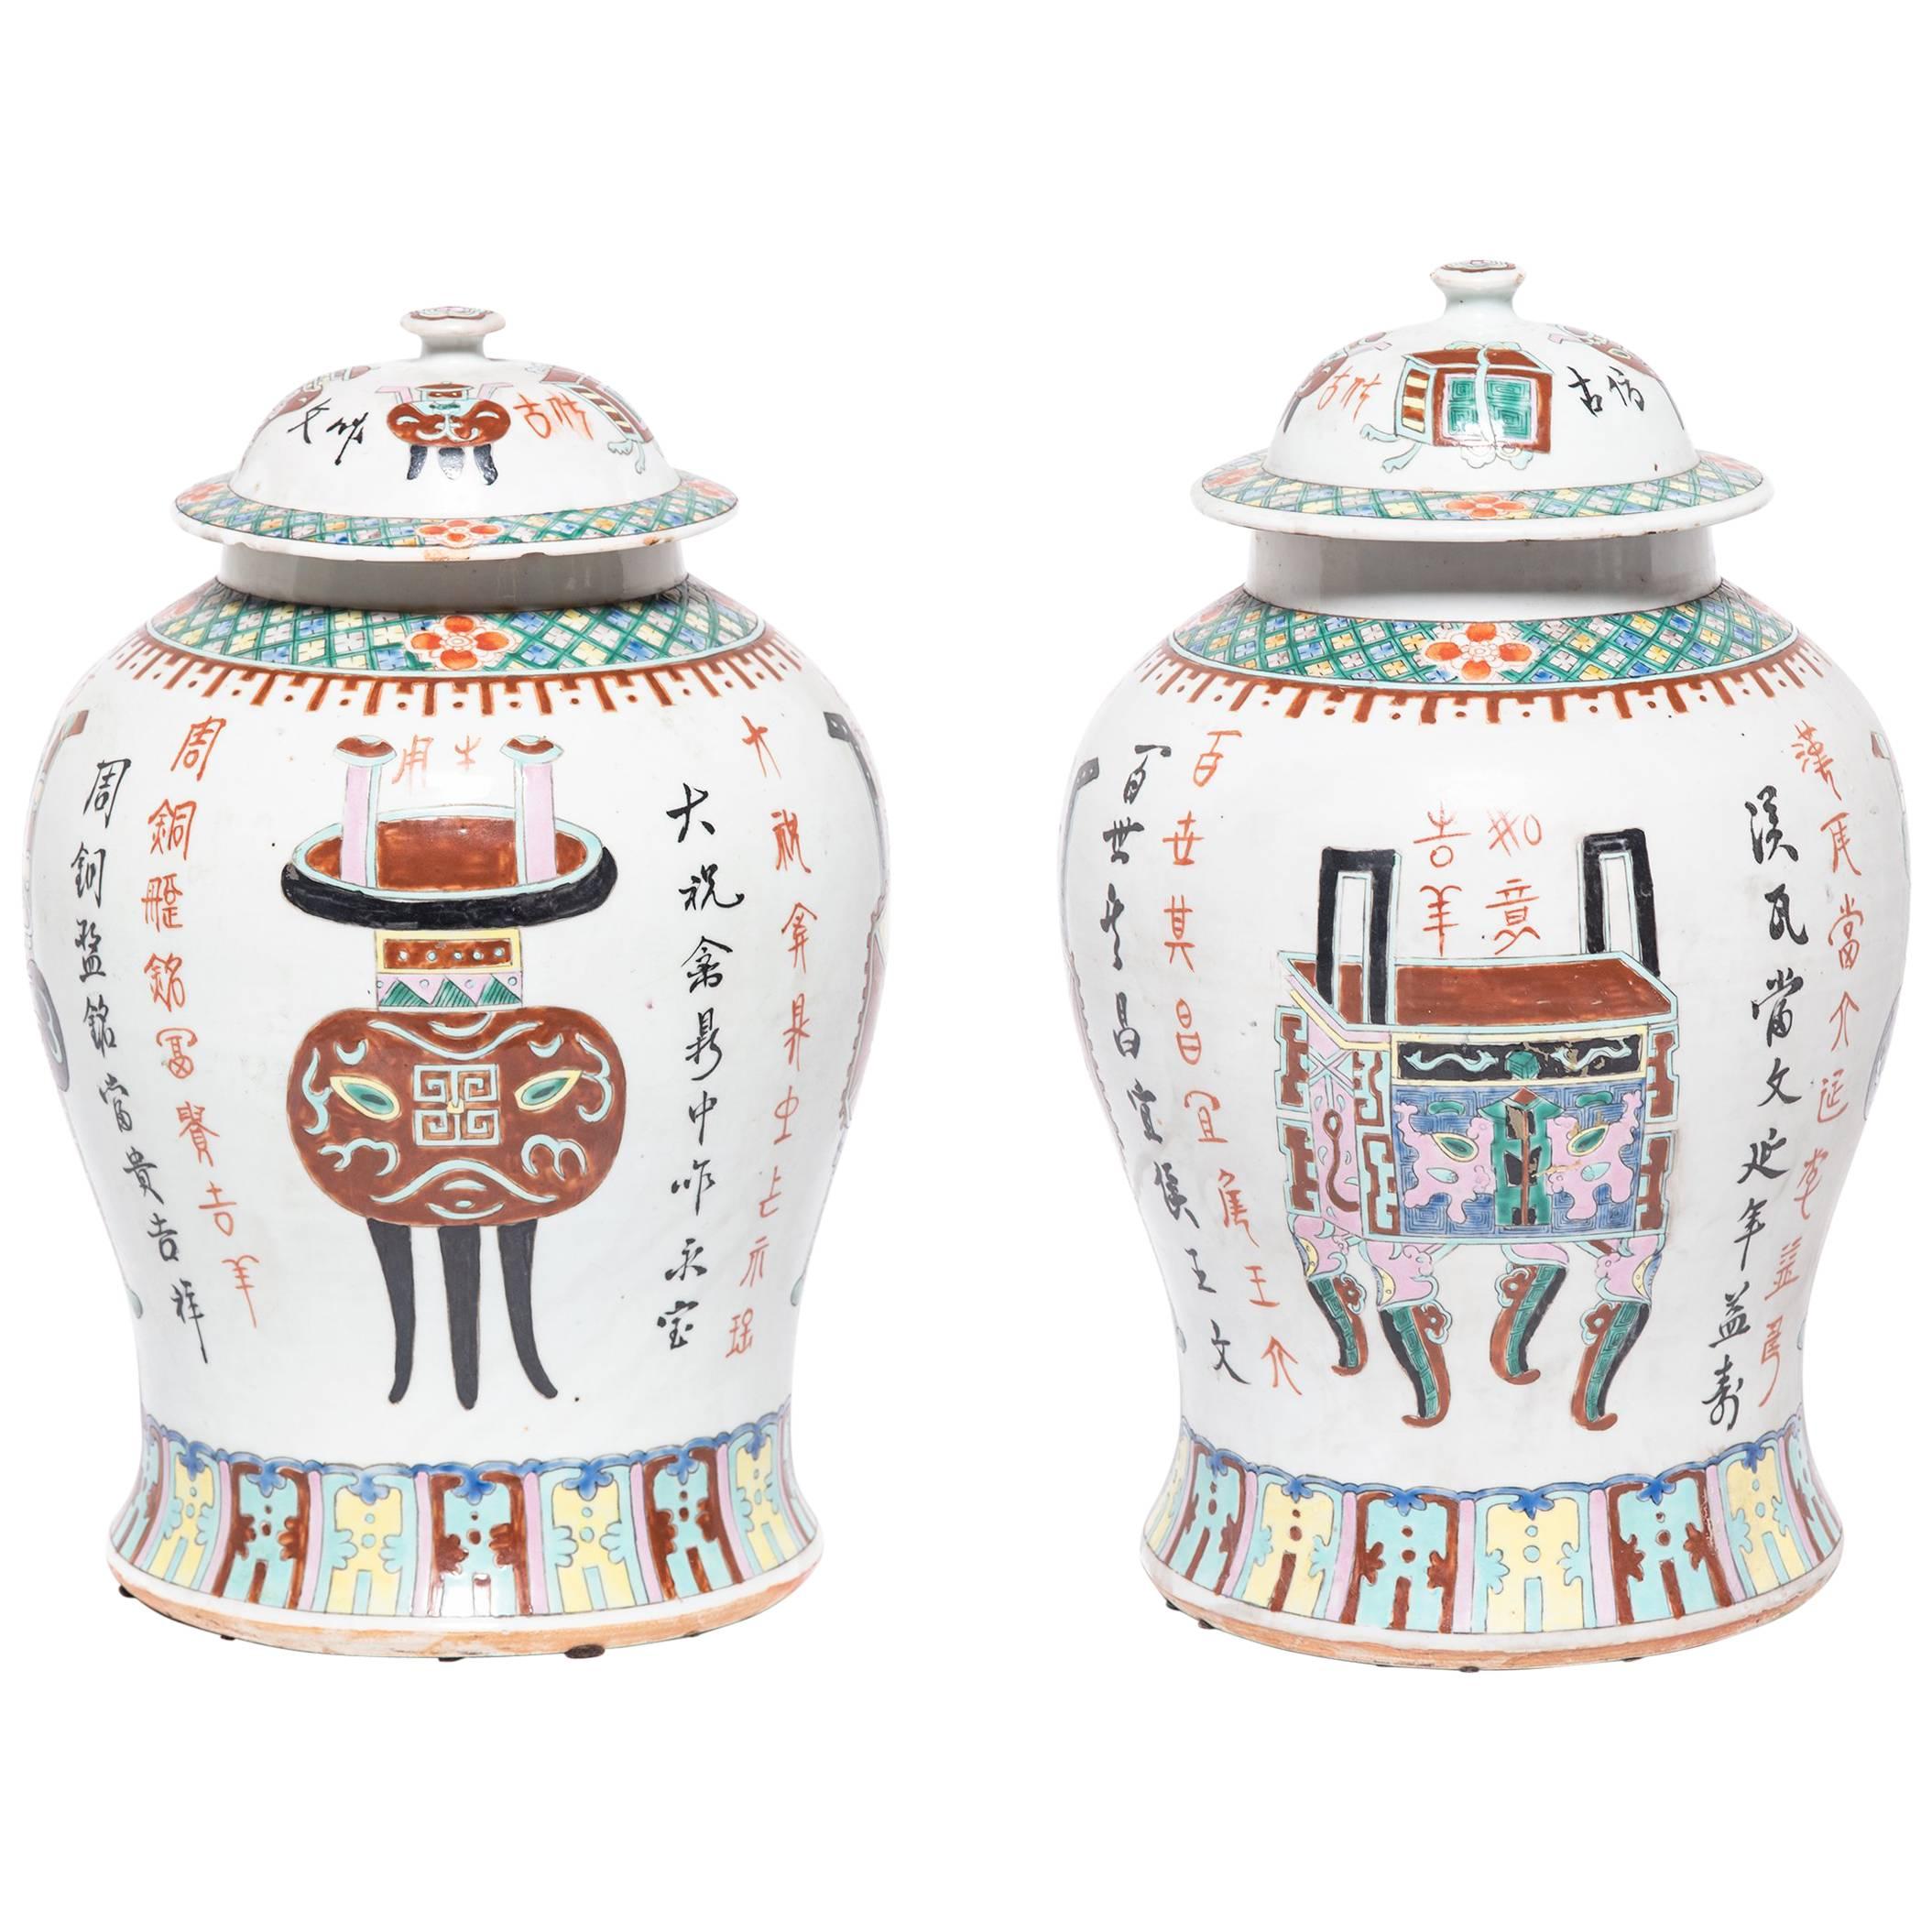 Pair of Chinese Wucai Baluster Jars with Censors, c. 1900